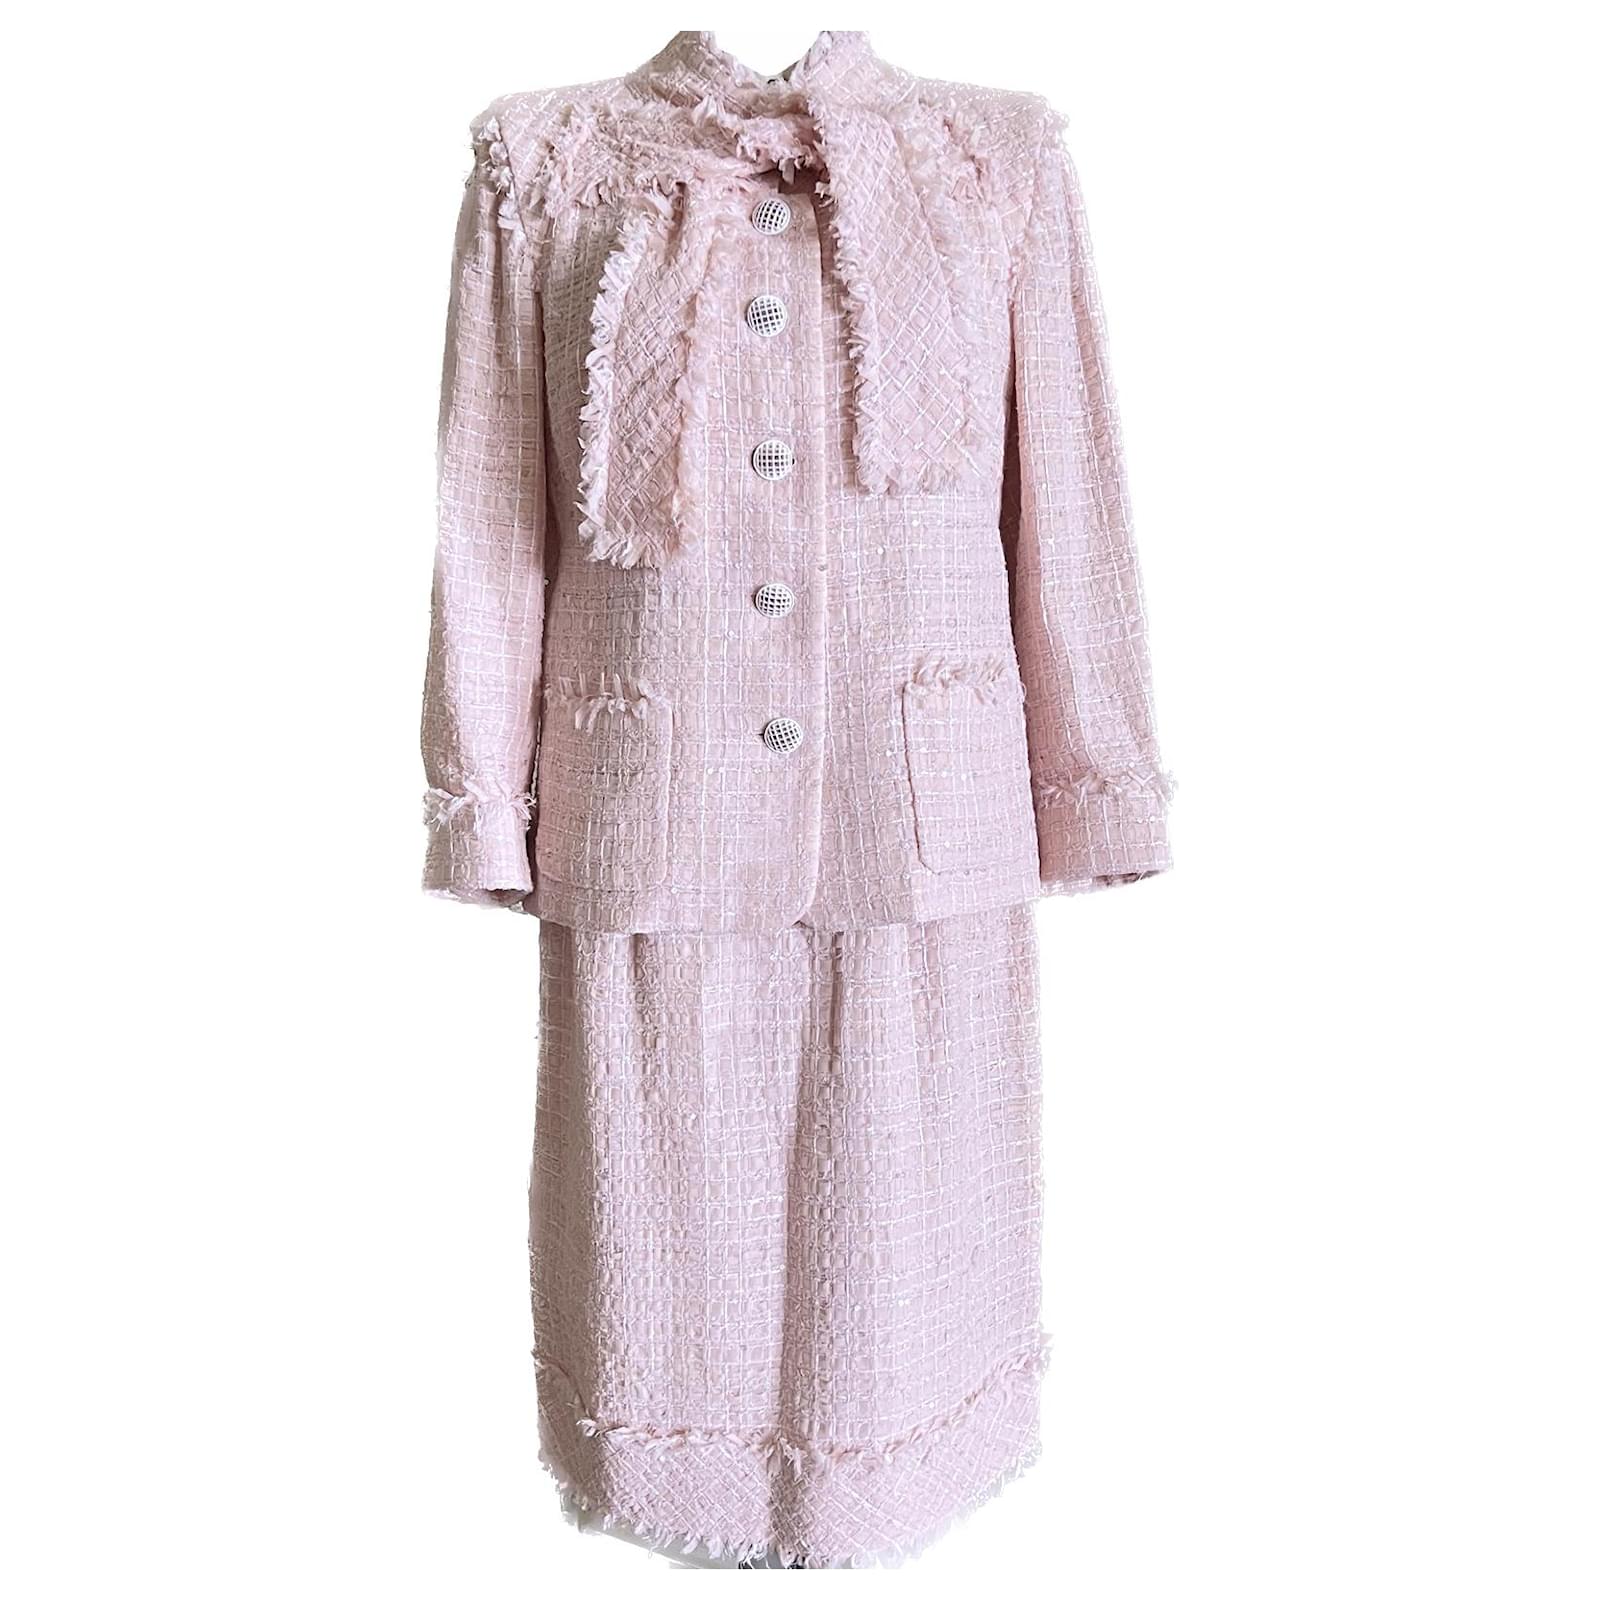 chanel suit, chanel, pink chanel, boucle, vintage chanel, authentic chanel,  designer suit, mother's day, gift for her, pink suit, vintage